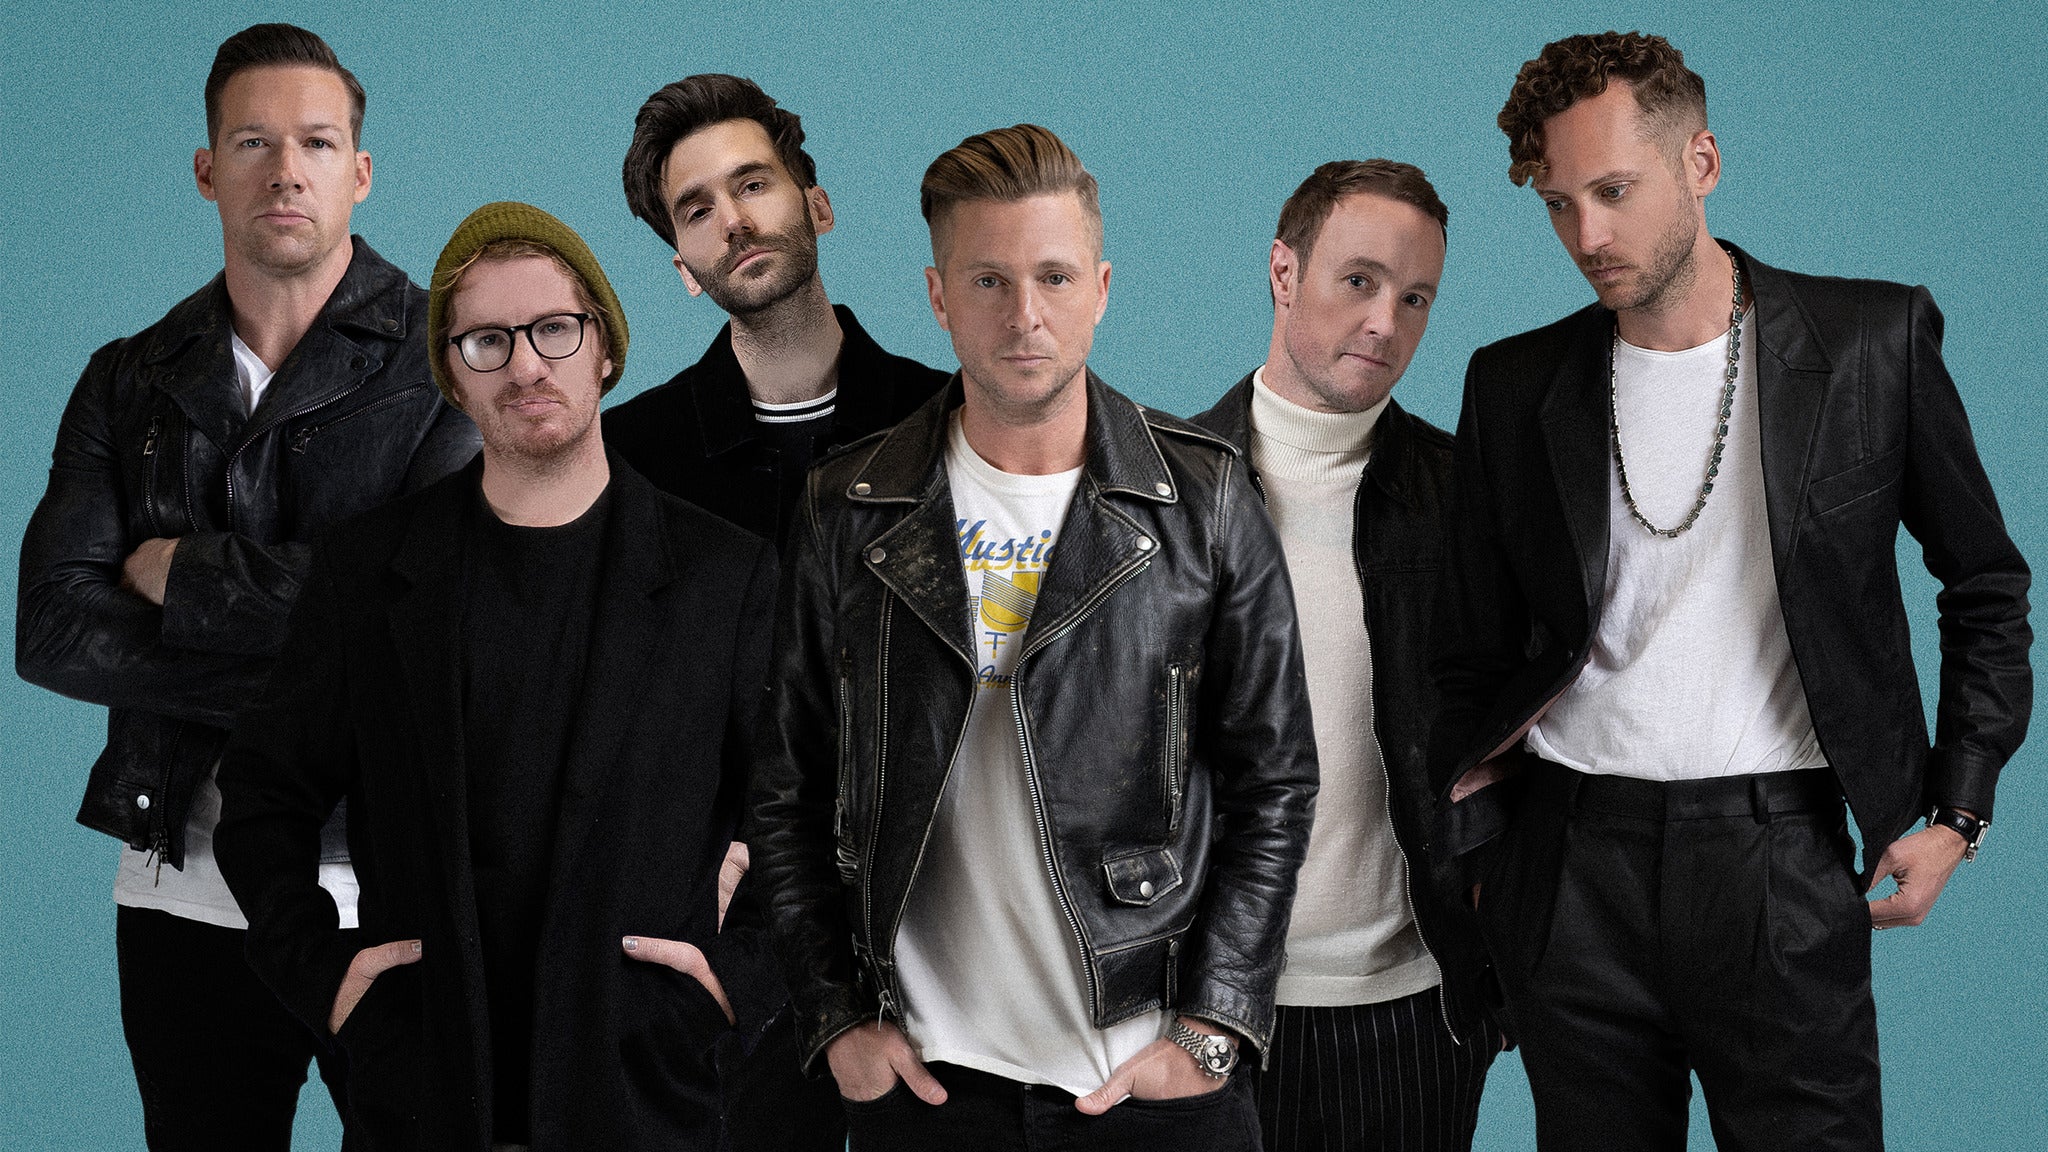 Mix 94.7's Deck The Hall Ball with OneRepublic pre-sale code